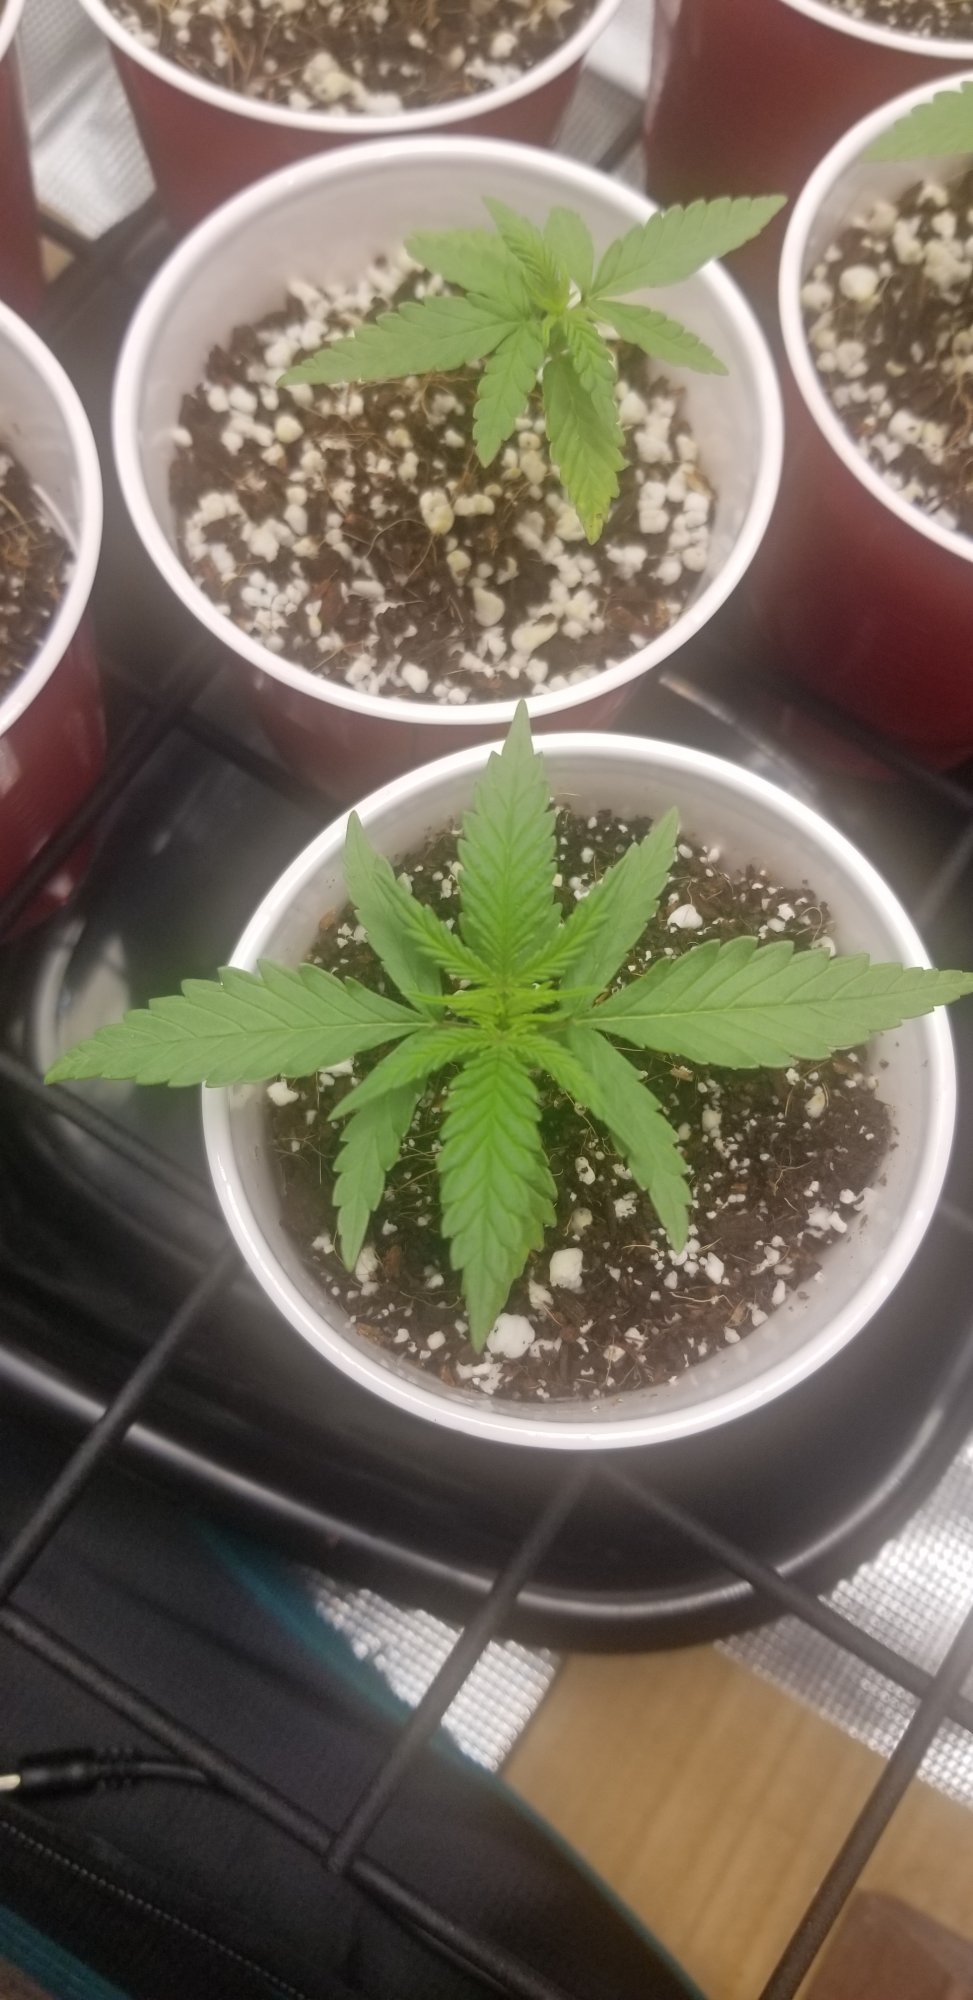 Trial error monitoring adjusting first grow coco coir daily pics and updates 9